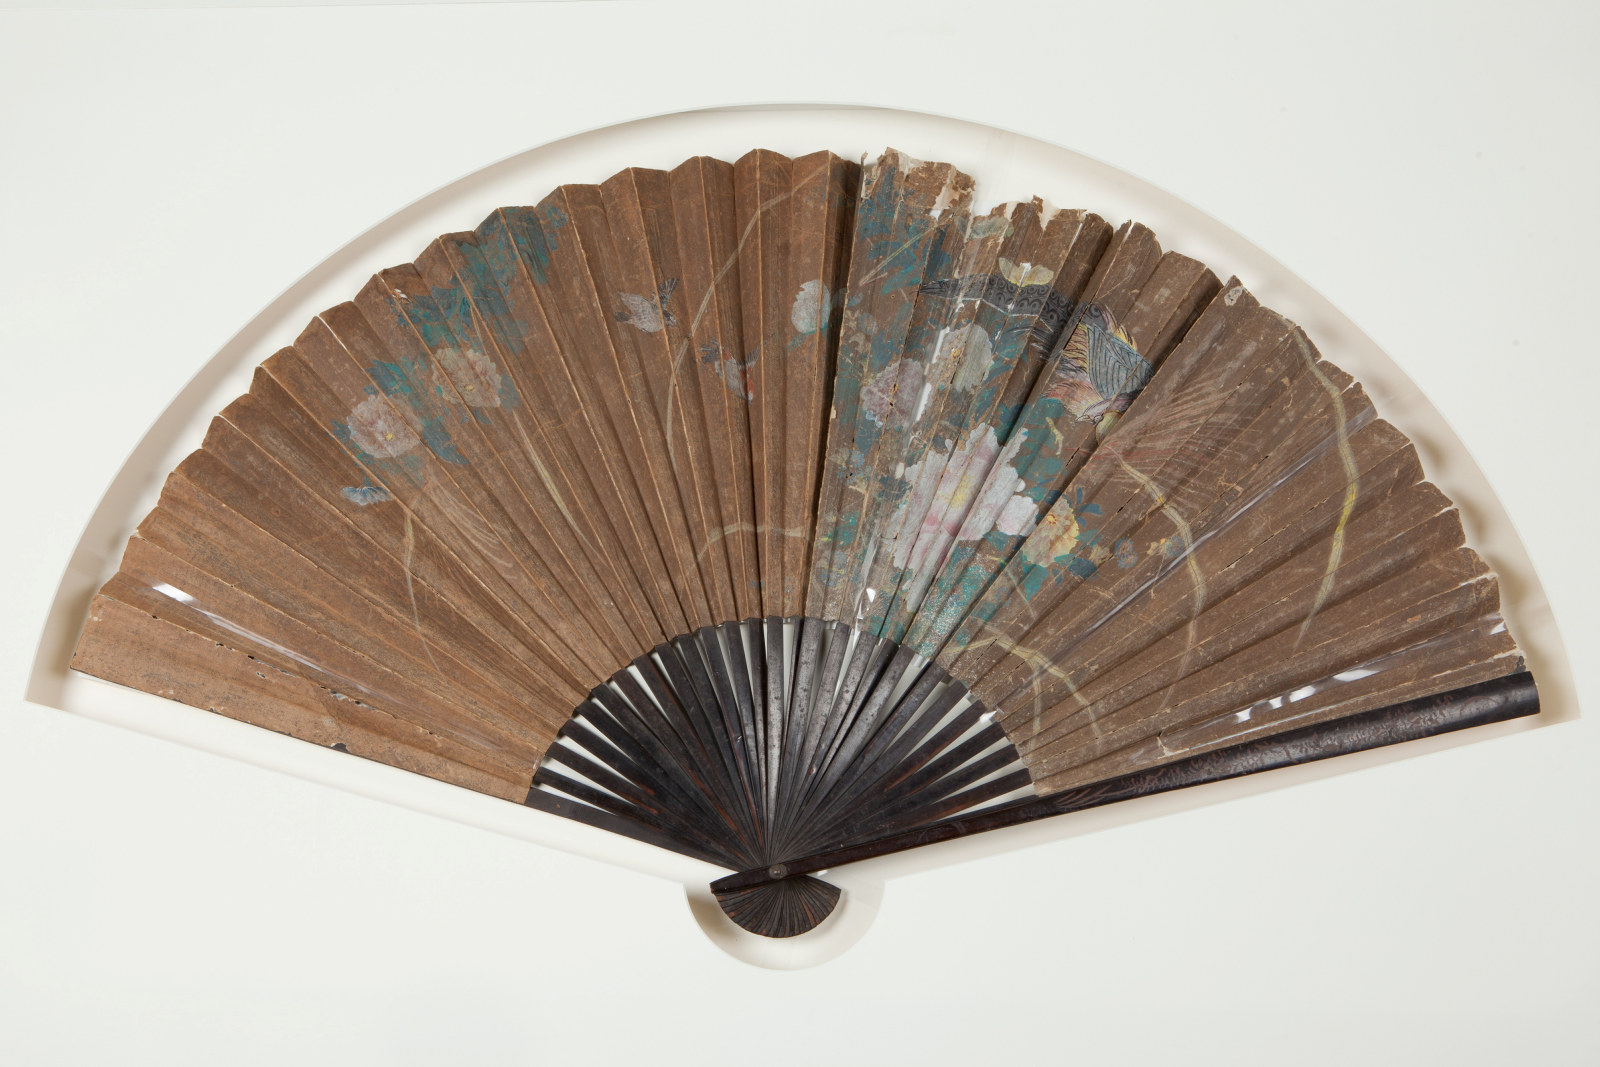 Large pleated paper fan with a handpainted floral and bird design, circa 19th century